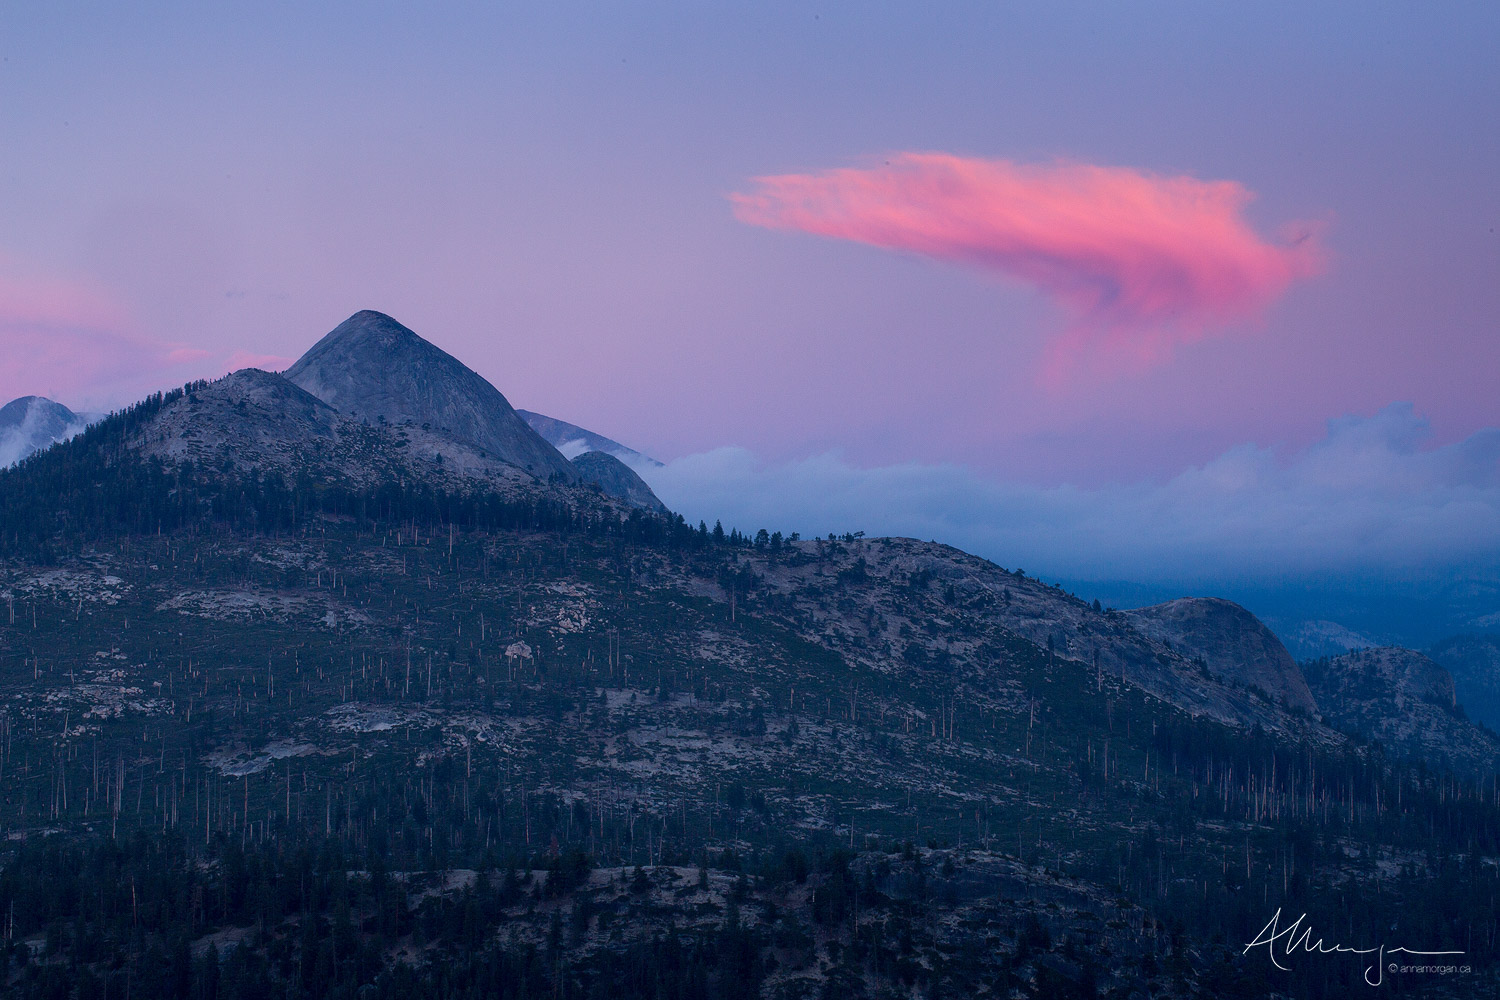 A sunset lit pink cloud appears to talk in communion with a mountain peak in Yosemite National Park.